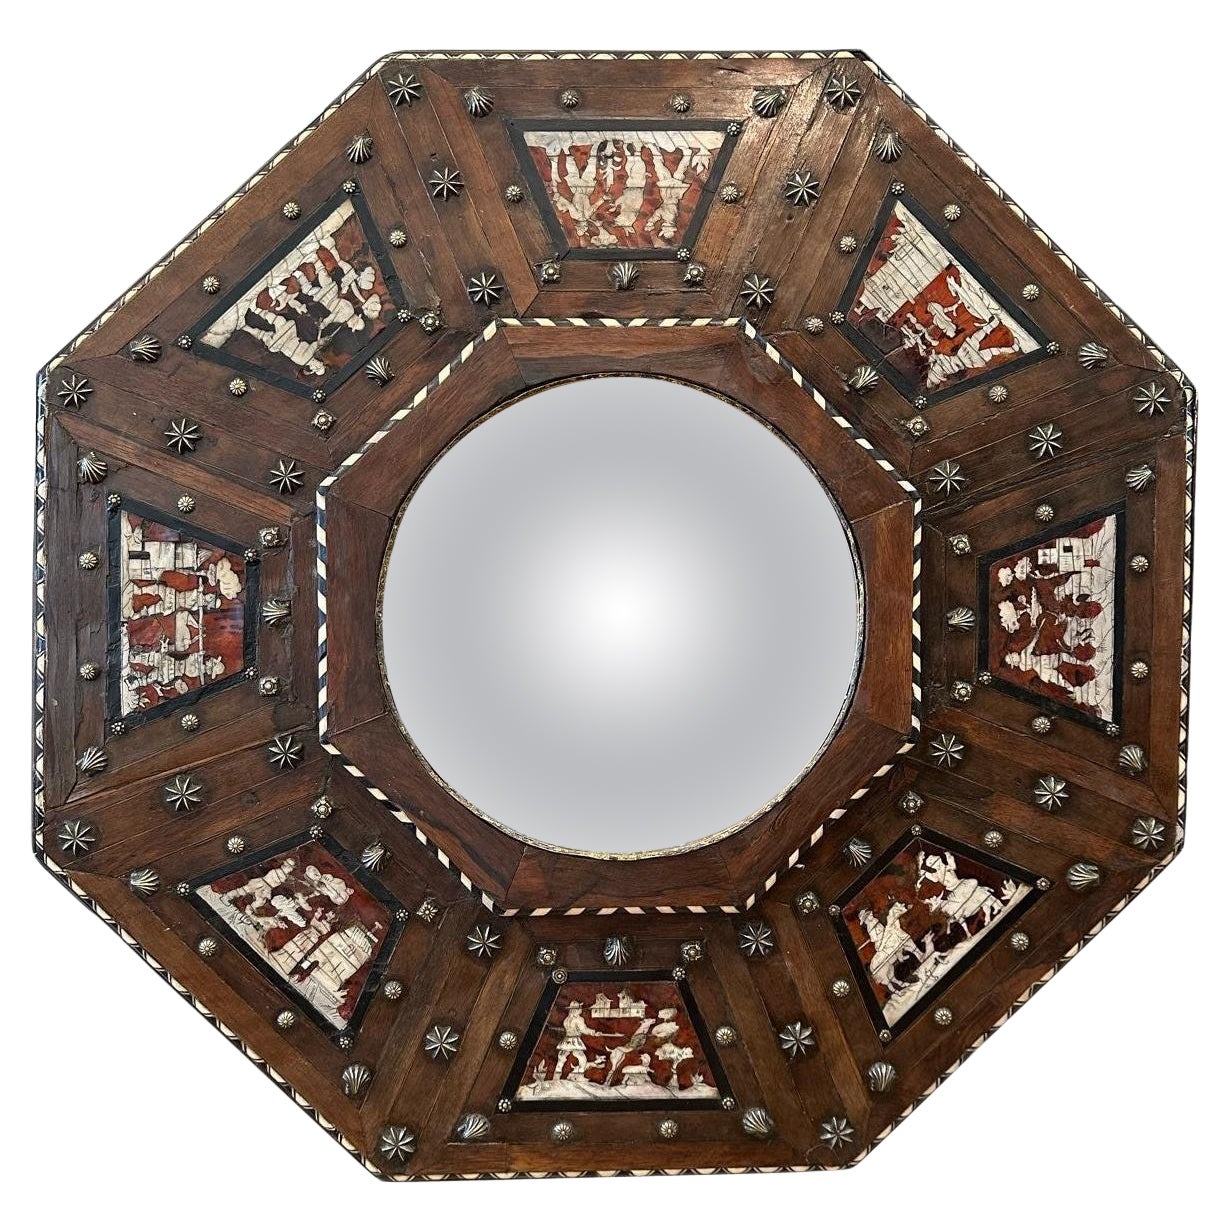 Rare 17th Century Octagonal Baroque Inlaid Wood Framed Mirror For Sale